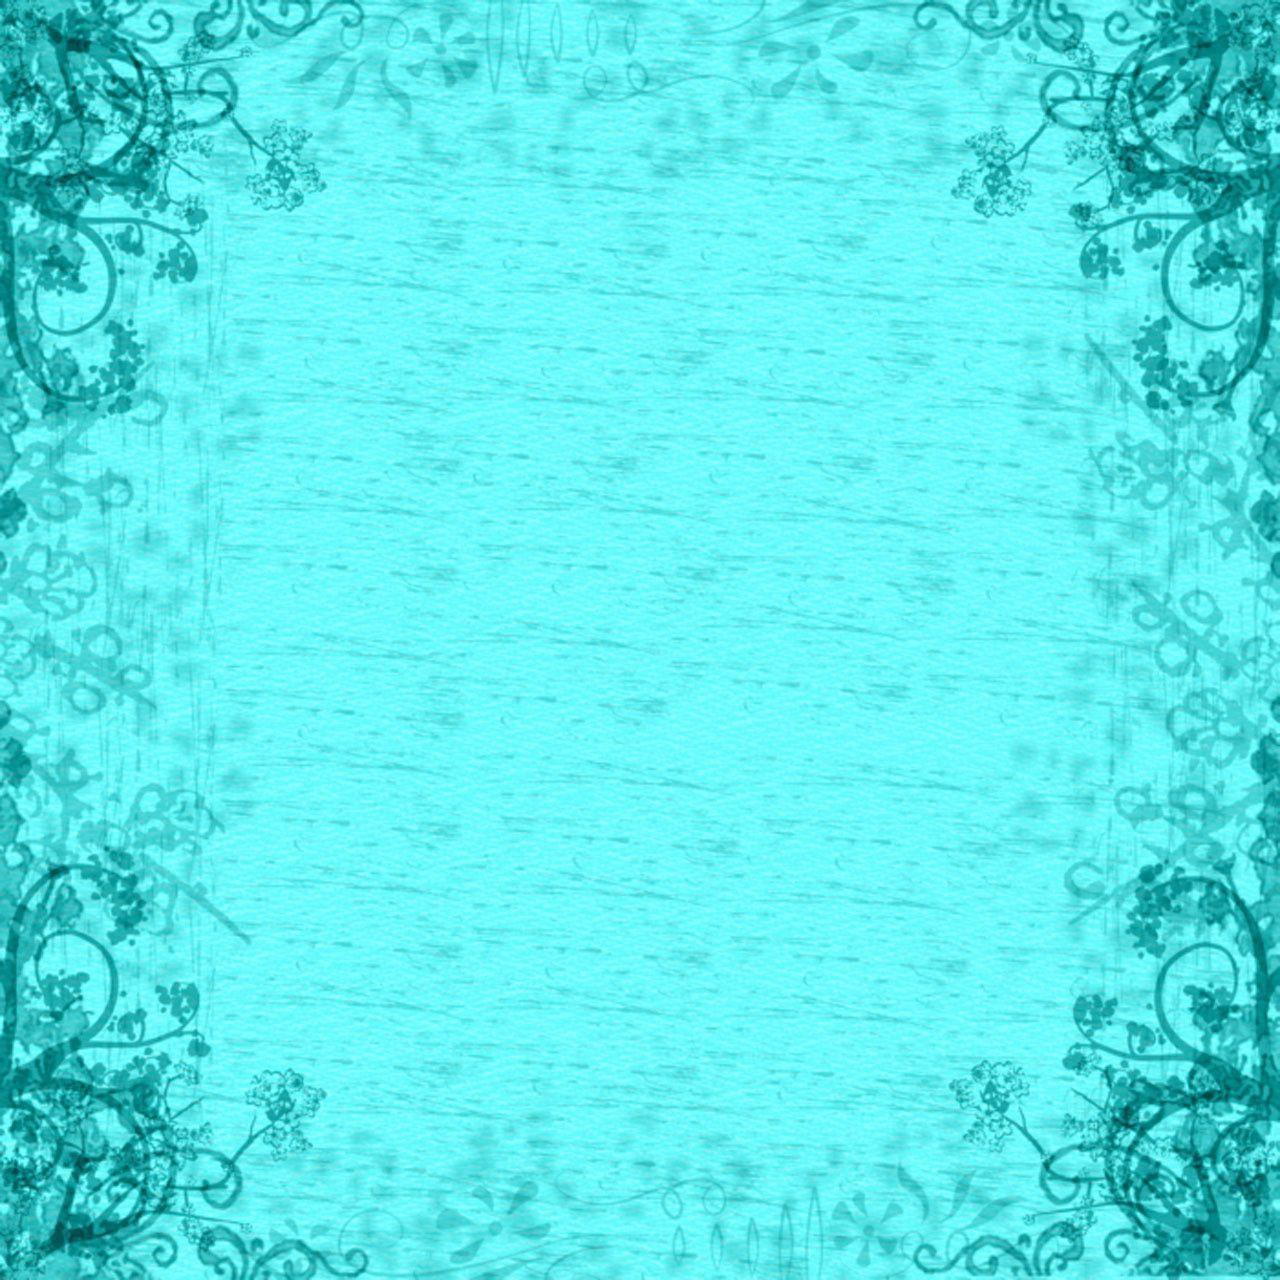 Teal Backgrounds Wallpaper Cave